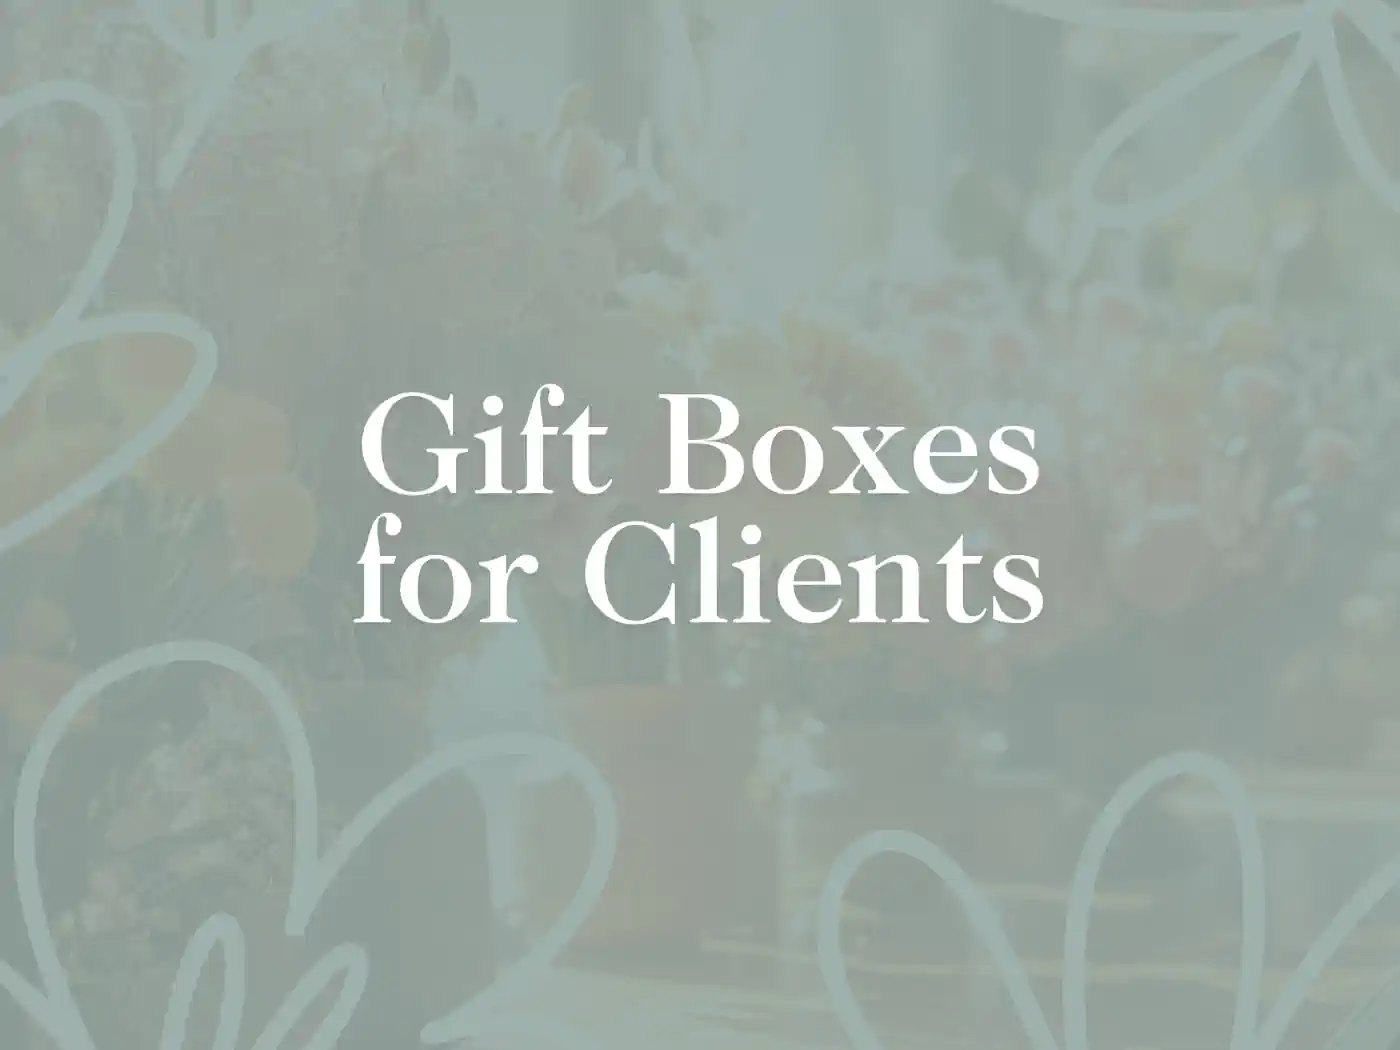 Promotional image featuring the text 'Gift Boxes for Clients' overlaying a subtle floral background, designed to evoke elegance and care in client relations. Fabulous Flowers and Gifts - Delivered with Heart.